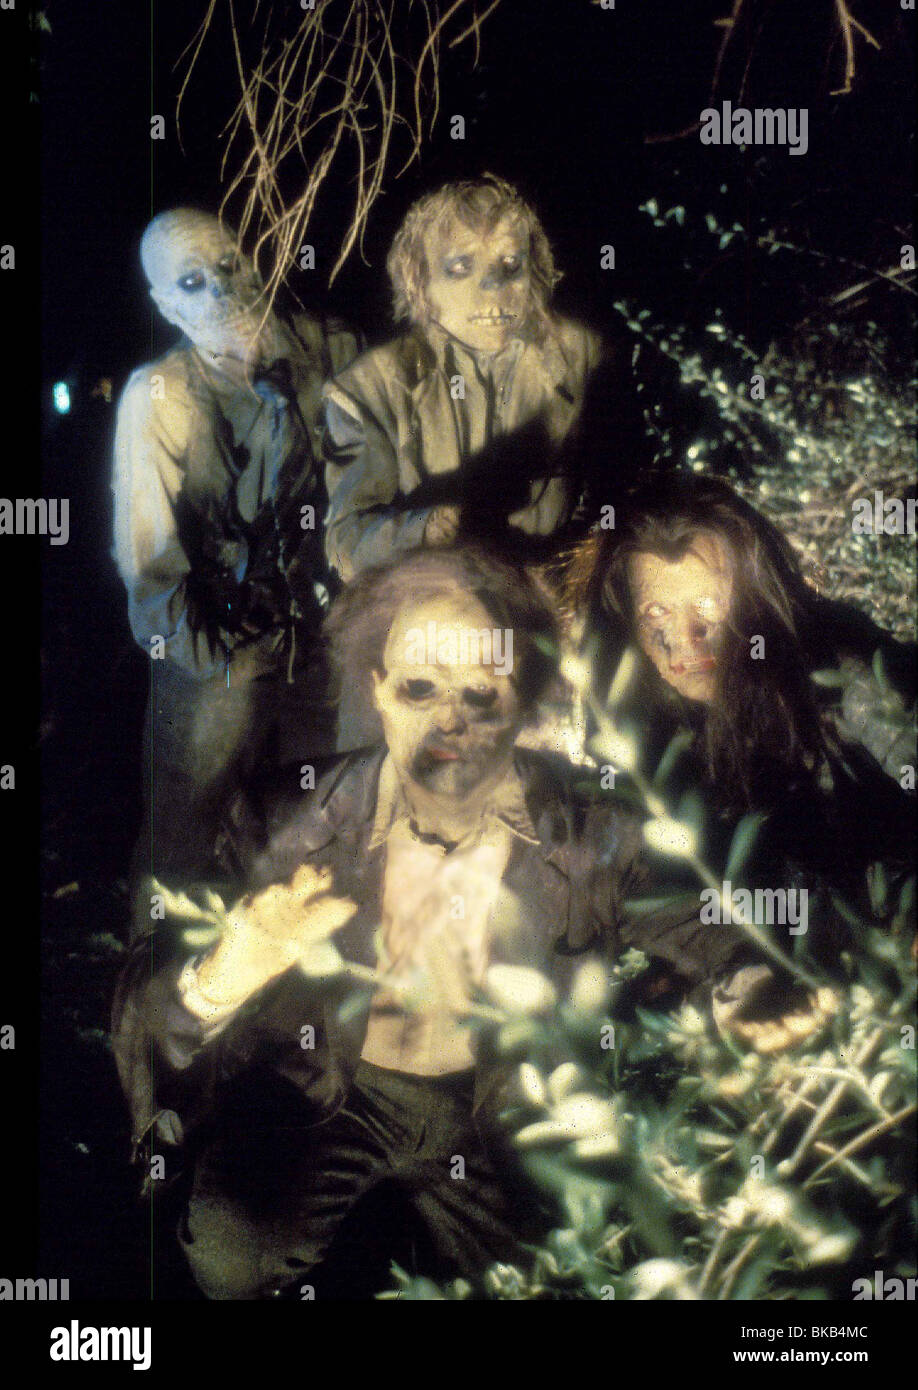 RETURN OF THE LIVING DEAD (1985) ZOMBIES RTLD 004 Stockfoto